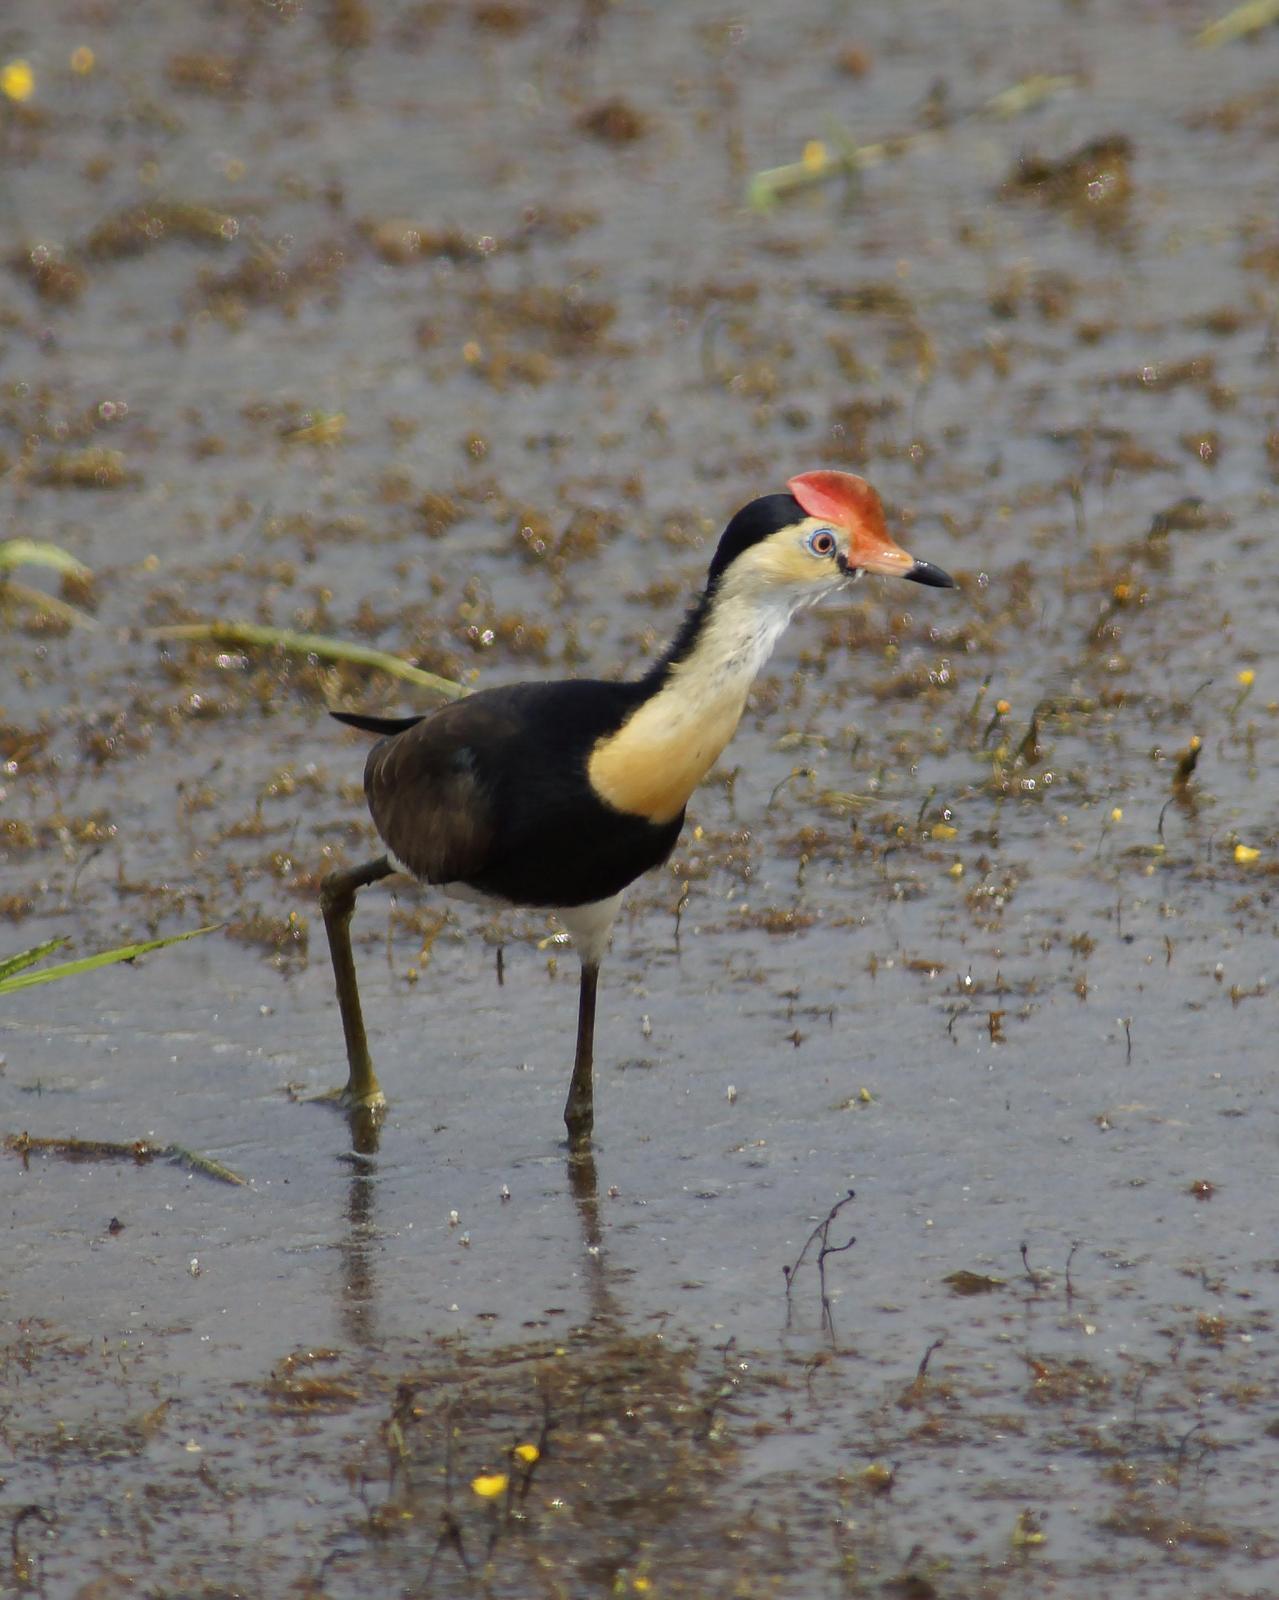 Comb-crested Jacana Photo by Steve Percival